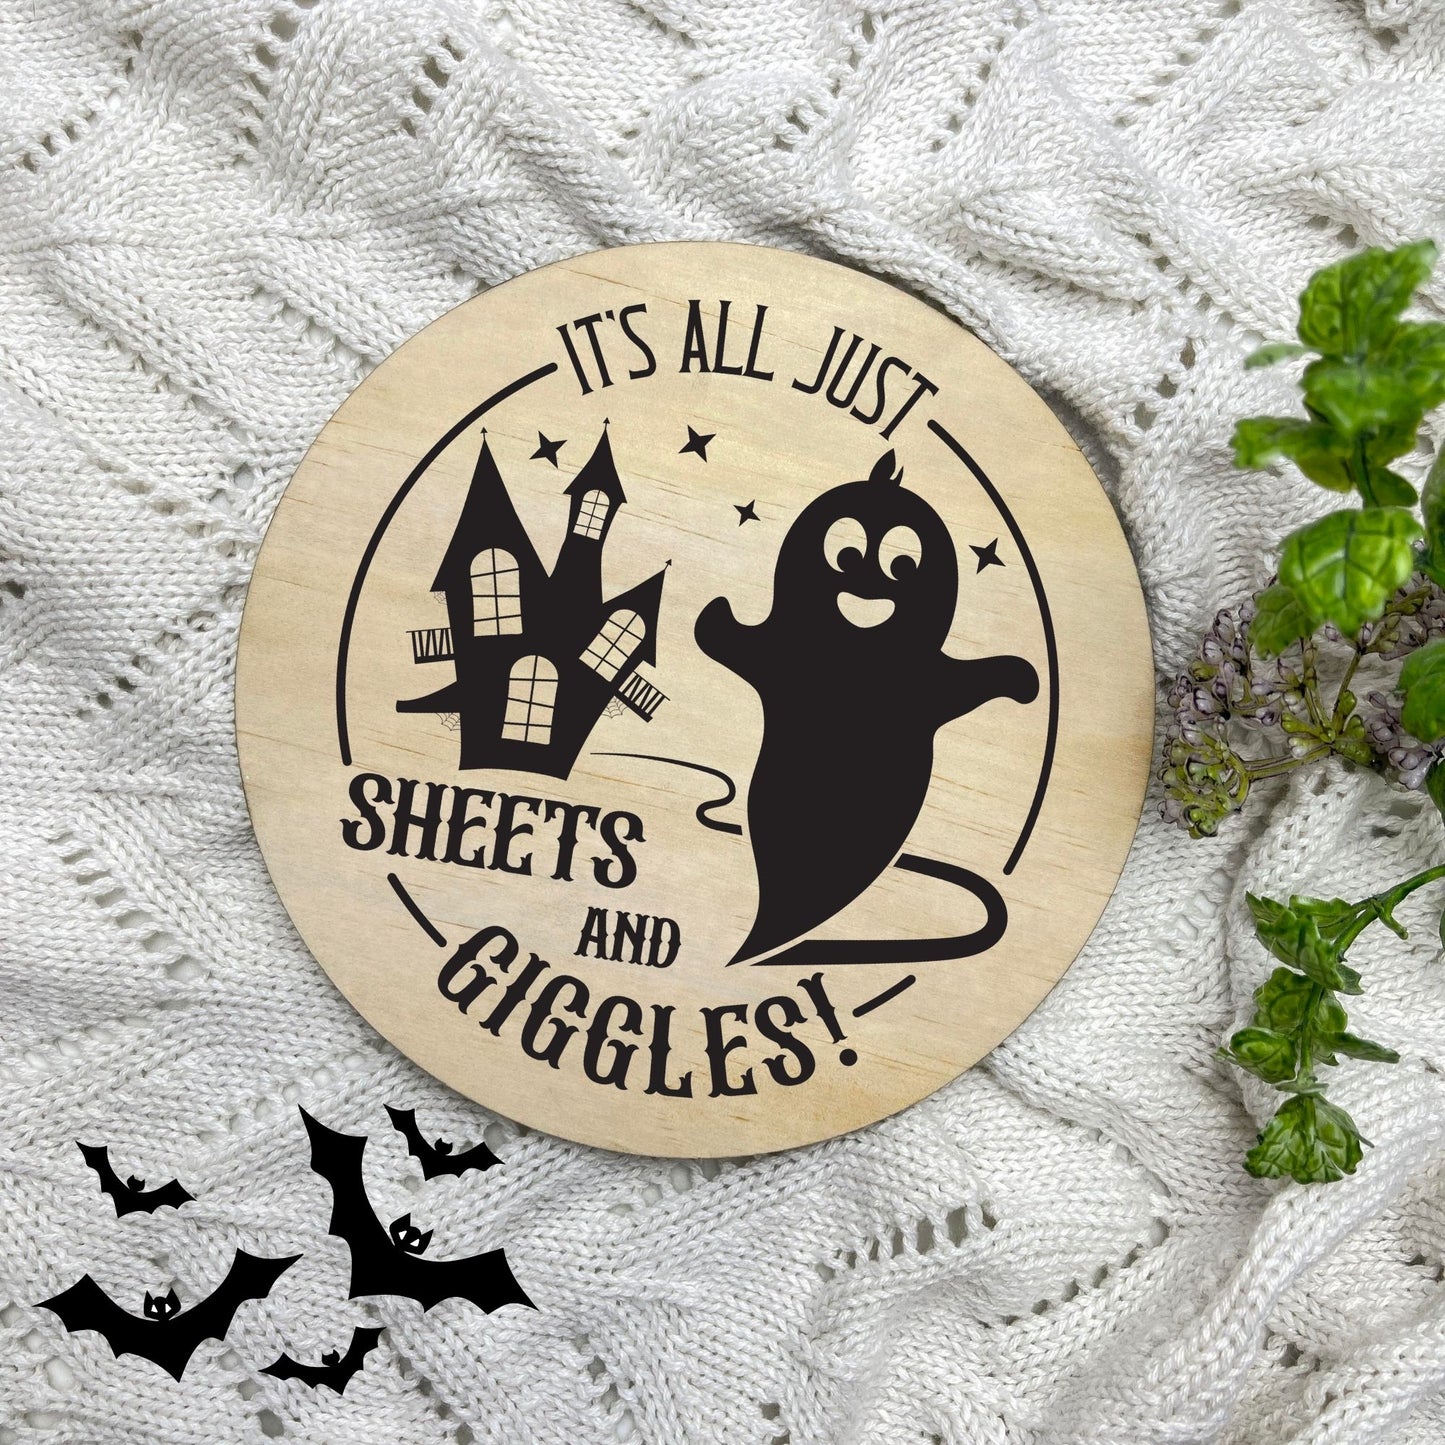 Sheets and giggles sign, Halloween Decor, Spooky Vibes, hocus pocus sign, trick or treat decor, haunted house h28